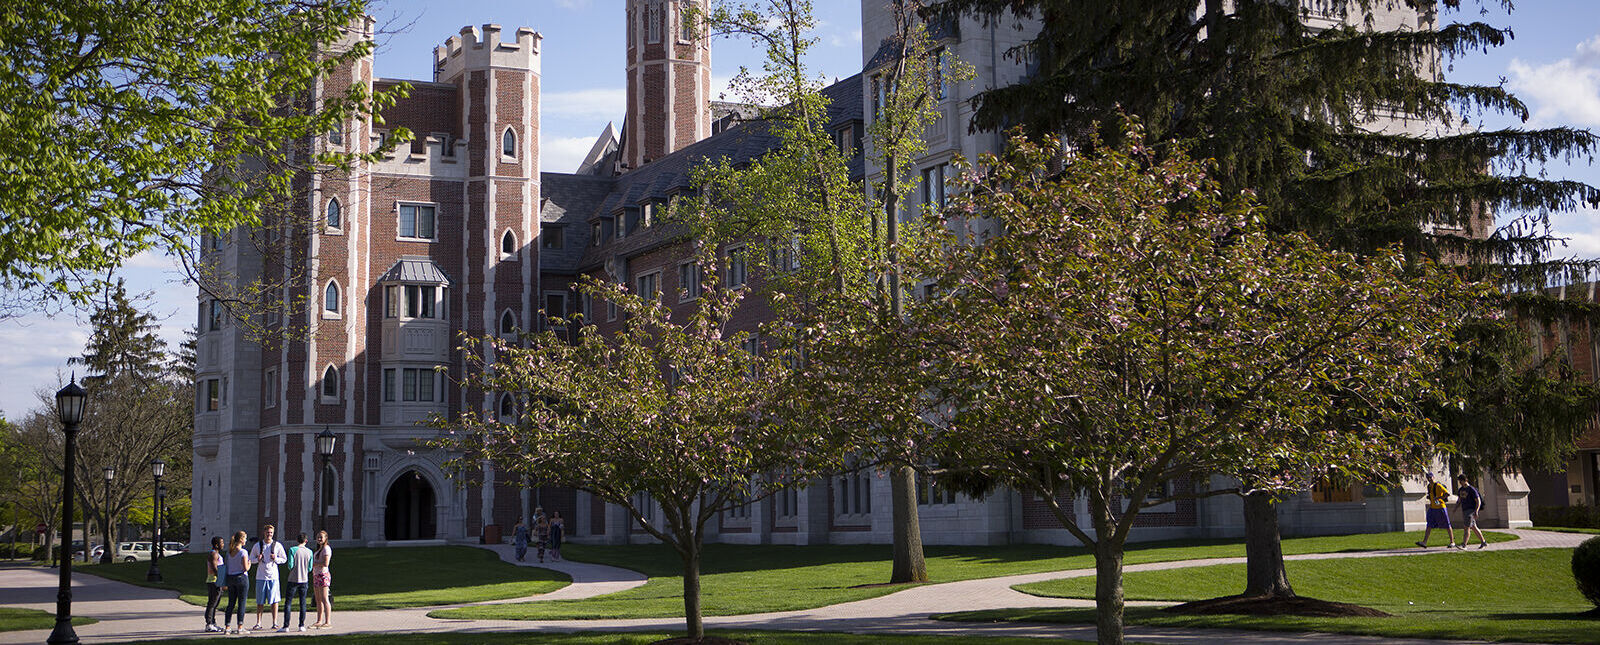 Trees are pictured around Meier Hall